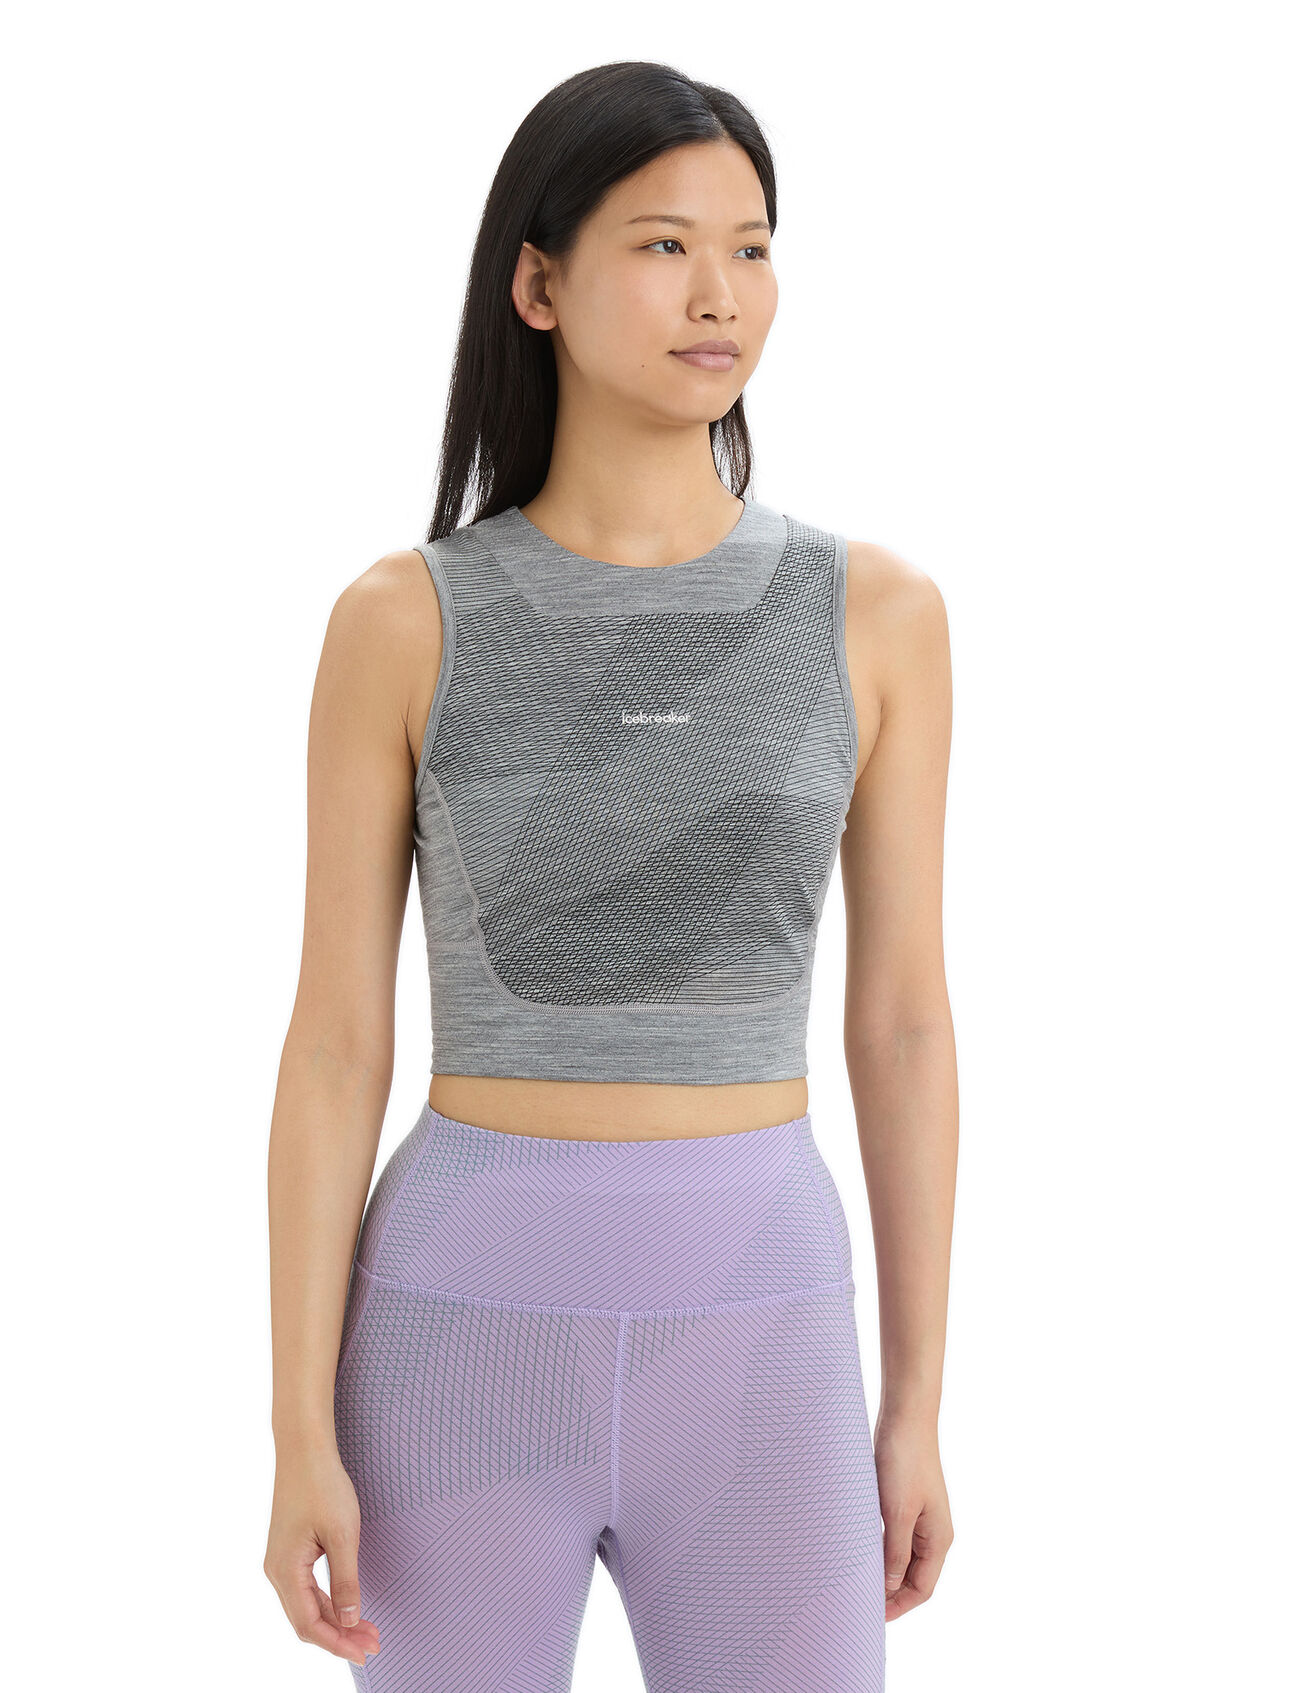 Womens ZoneKnit™ Merino Cropped Bra-Tank Geodetic Our most breathable, lightweight top for high-output activities, the ZoneKnit™ Cropped Bra-Tank Geodetic features a body-mapped combination of Cool-Lite merino jersey and ultra-breathable eyelet mesh, with a built-in bra. The unique geometric print is inspired by the curvature of the earth.